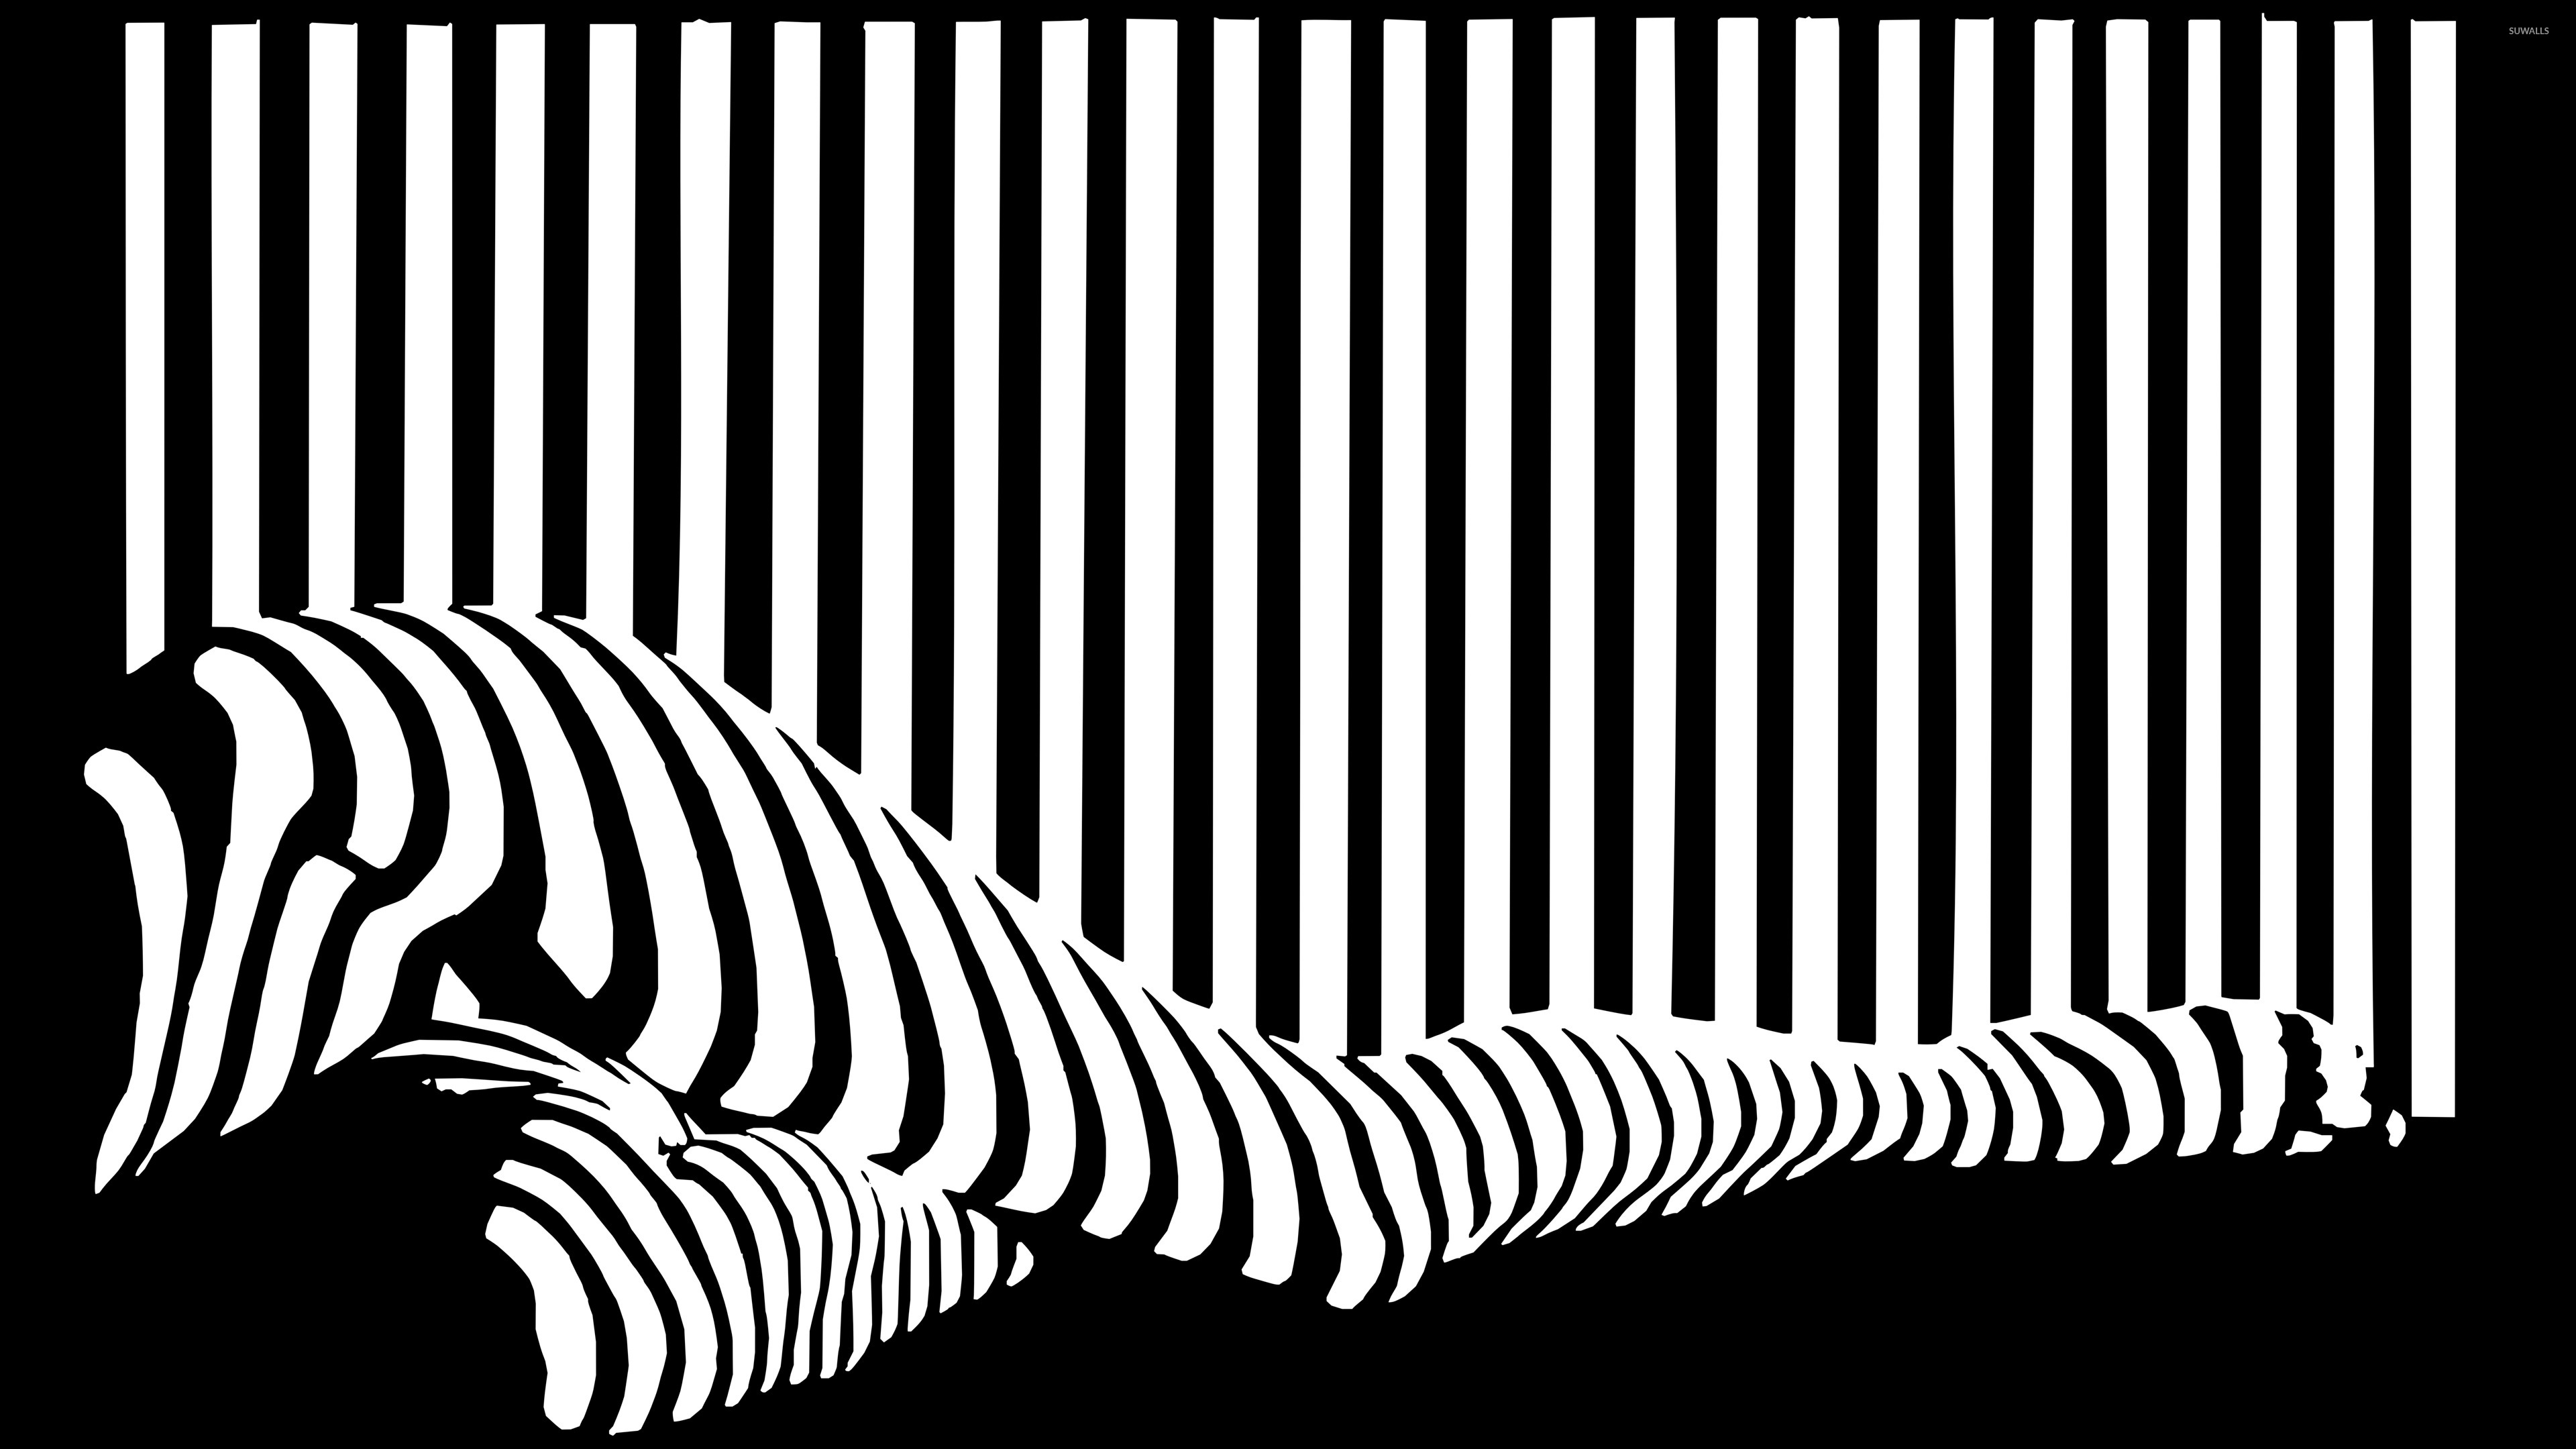 Black And White Stripes On Legs Wallpaper Vector Wallpapers